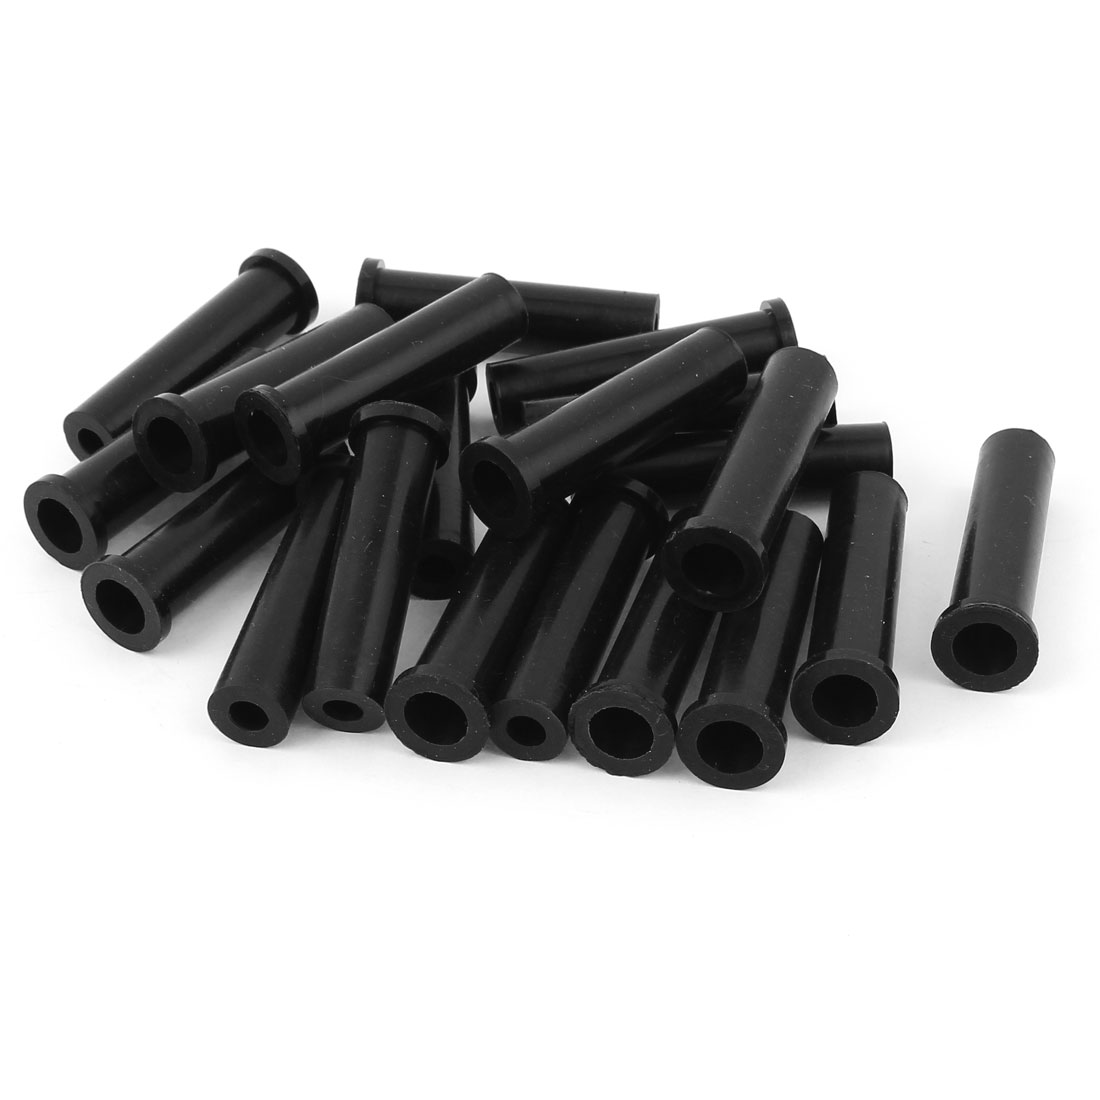 UXCELL Hot Sale 20Pcs/lot 50mm Long 10mm To 6mm Rubber Strain Relief Cord Boot Protector Cable Sleeve Hose For Power Tool